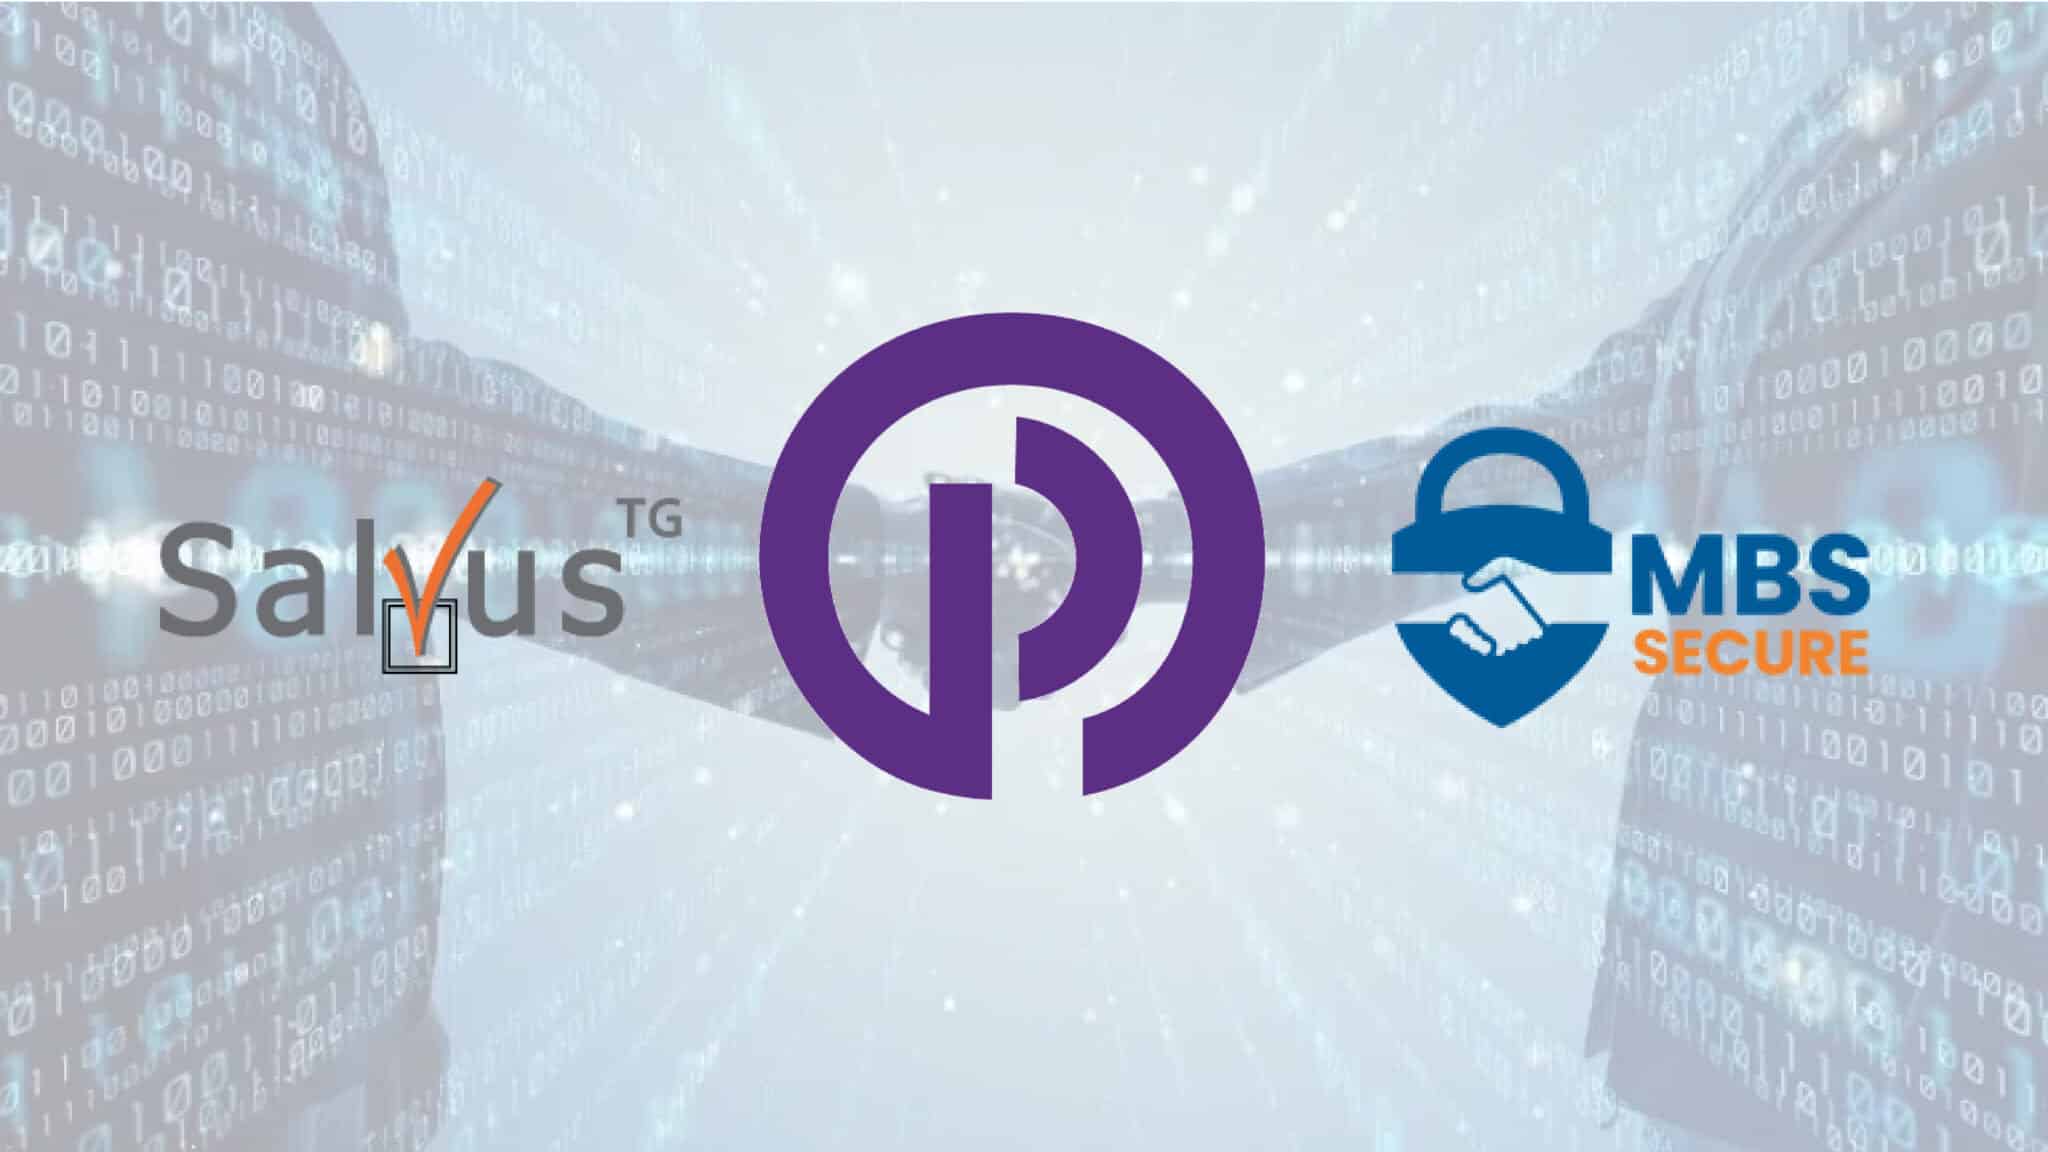 The Purple Guys continues strategic expansion with two new acquisitions, MBS Secure and Salvus TG.